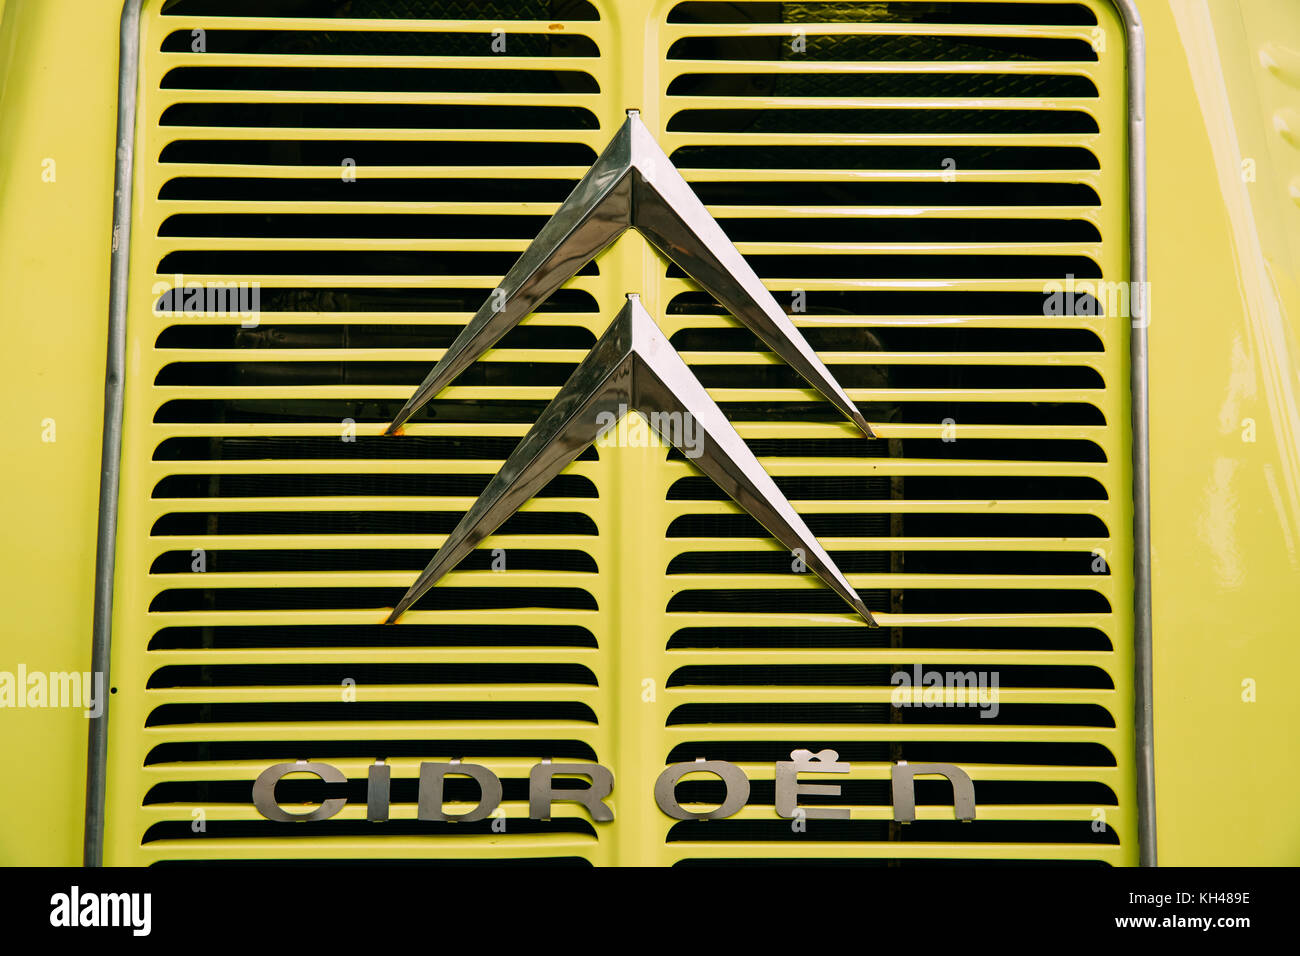 Prague, Czech Republic - September 23, 2017: Close View Of Old Logo Logotype Sign Of Citroen On Hood Of Old Retro Vintage Yellow Car. Stock Photo